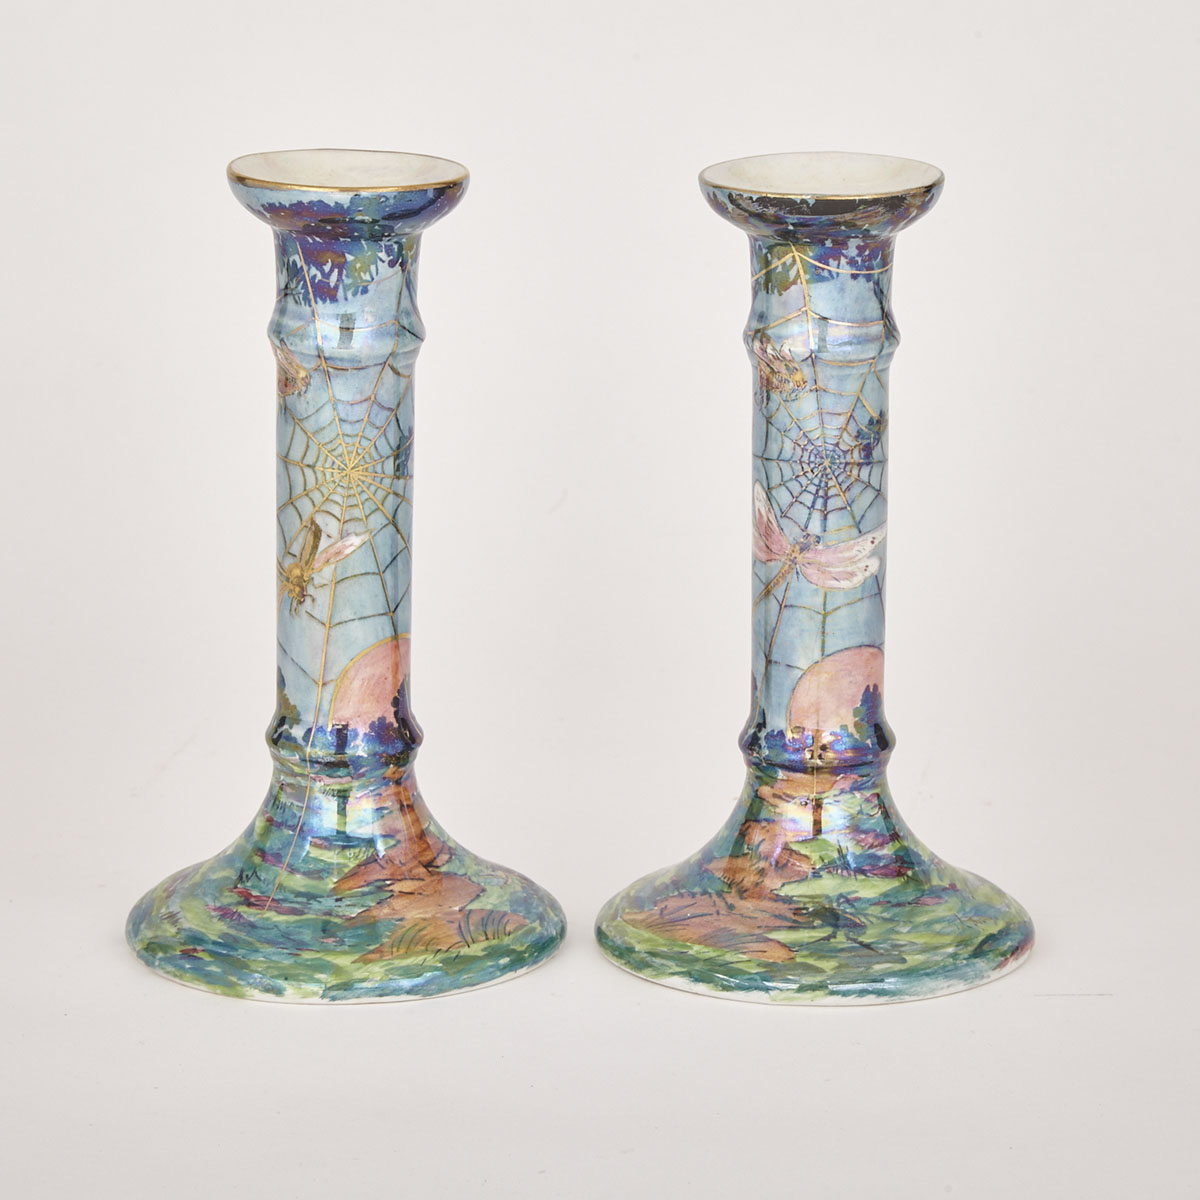 Pair of Grimwades Byzanta Ware Spider Web Pattern Candlesticks, early 20th century